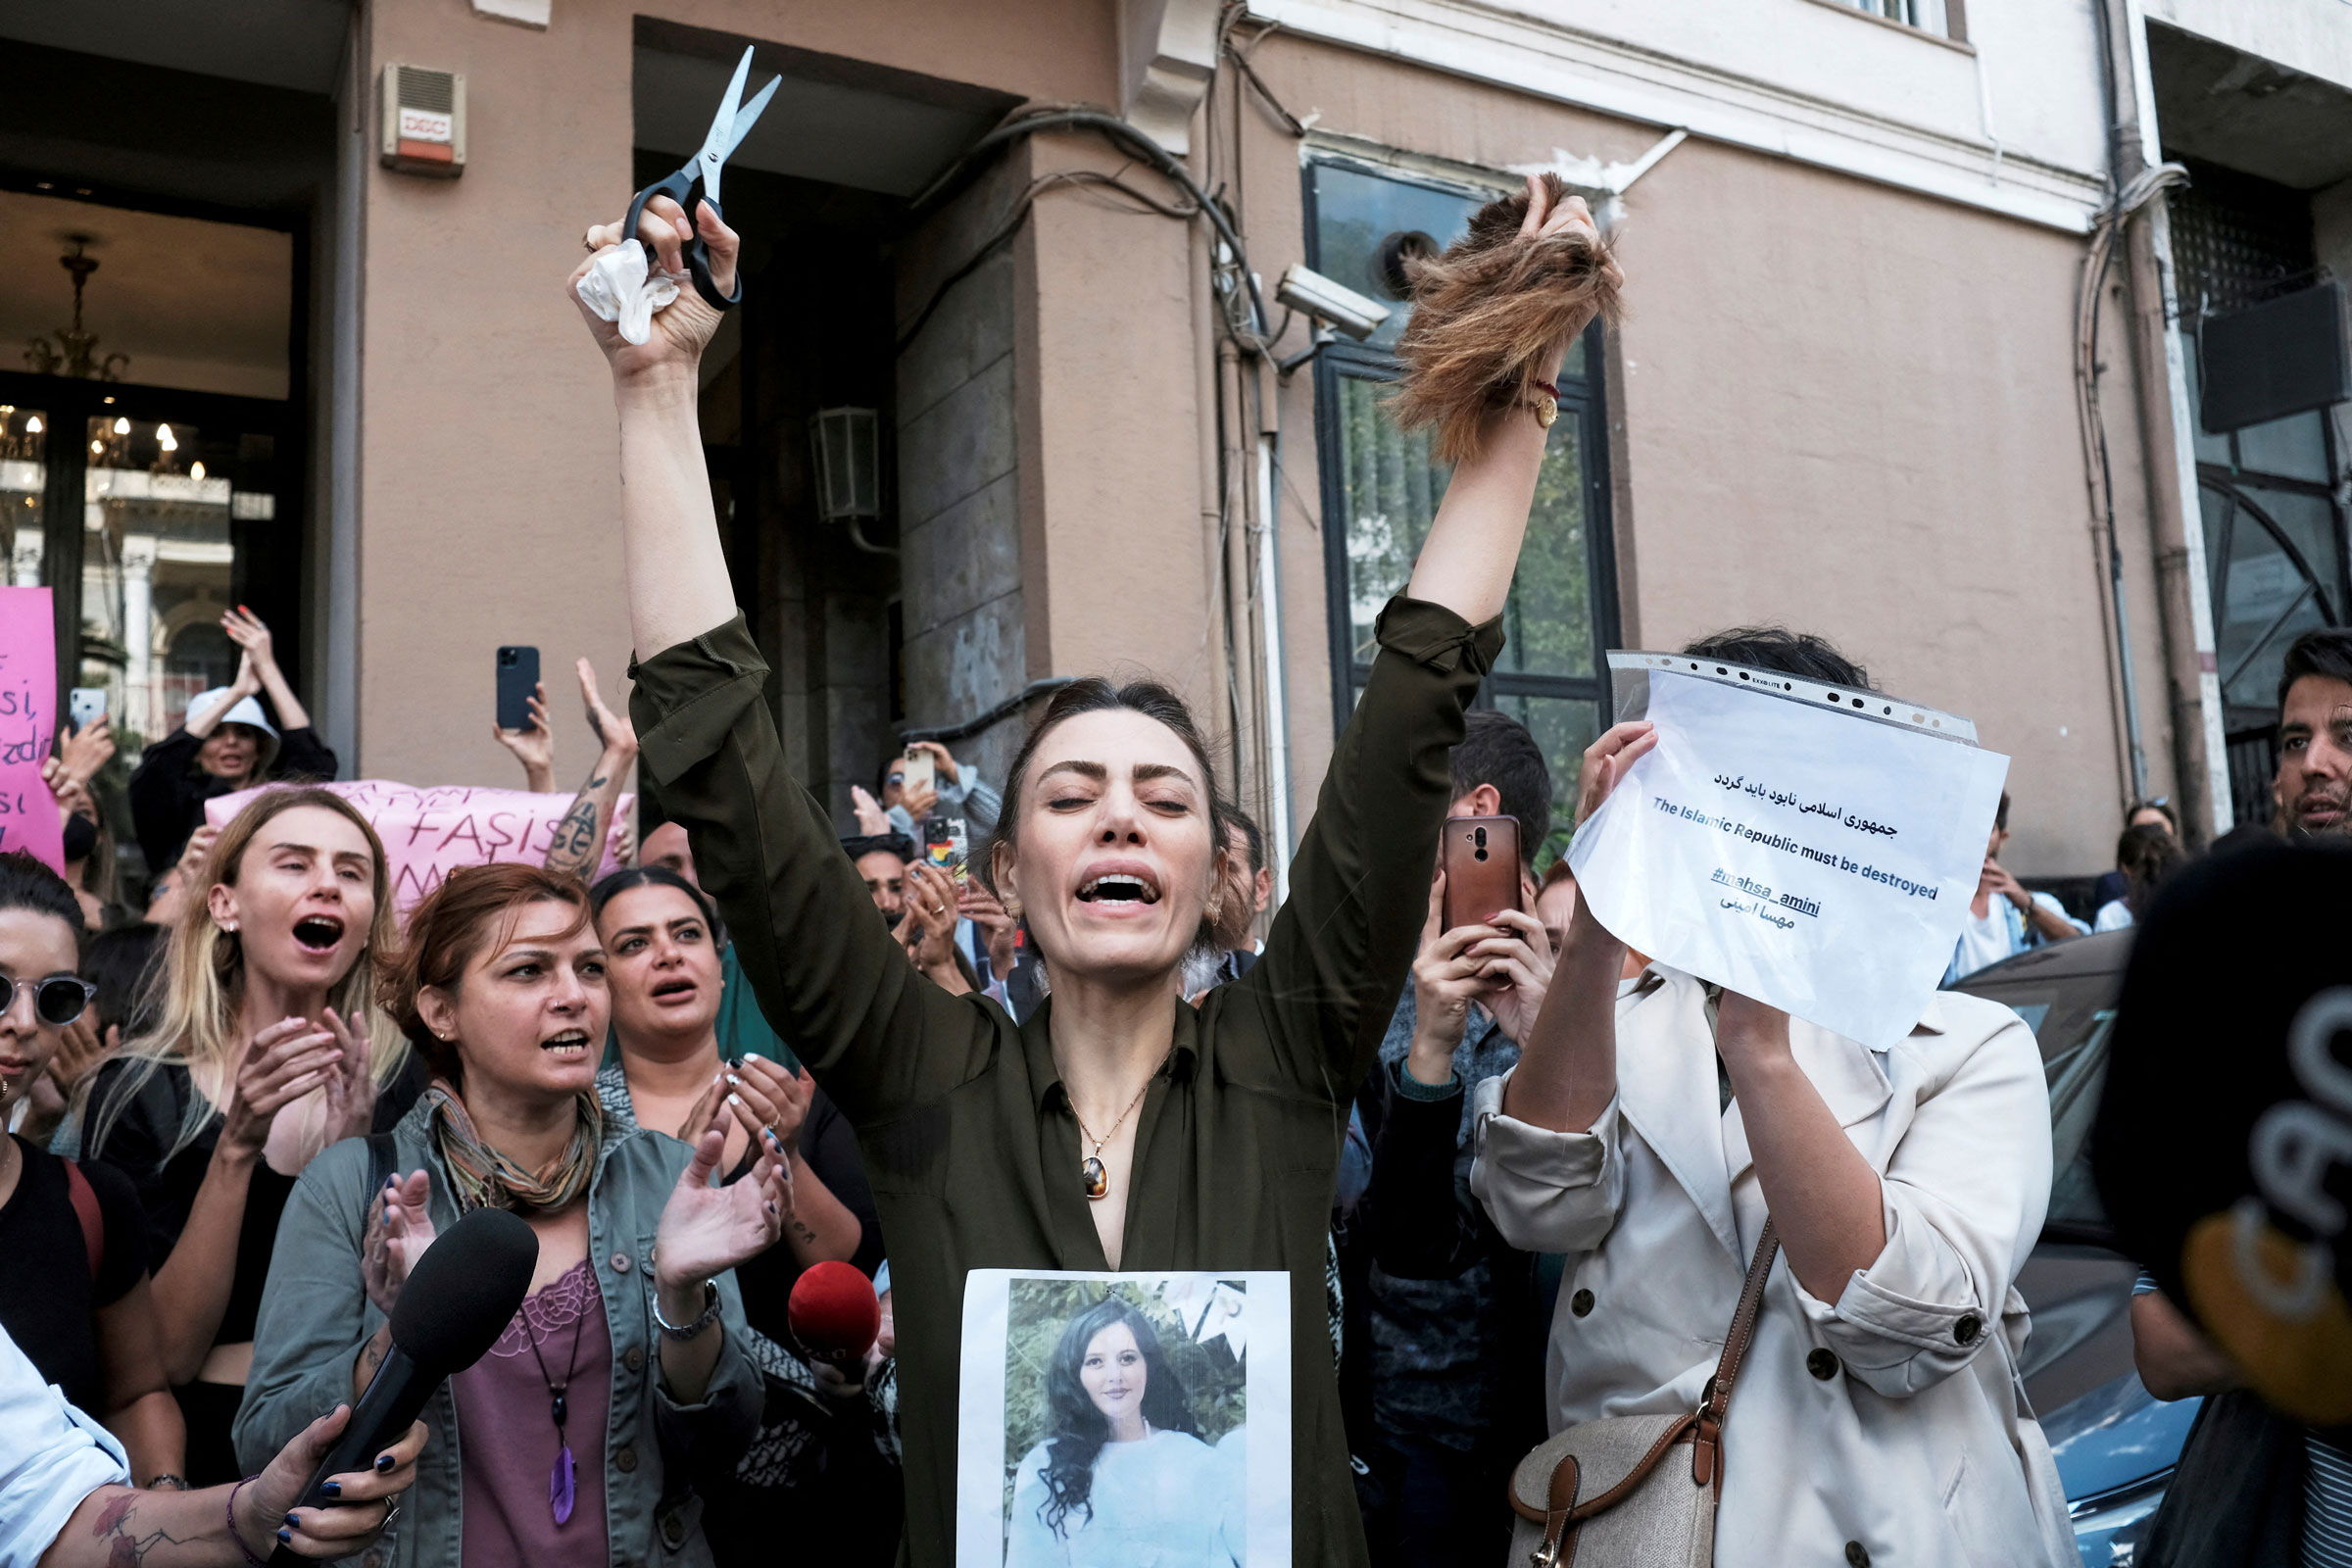 <b>Istanbul, Turkey</b> Nasibe Samsaei, an Iranian woman living in Turkey, reacts after she cut her hair during a protest outside the Iranian consulate in Istanbul, Turkey on Sept. 21, 2022. (Murad Sezer—Reuters)